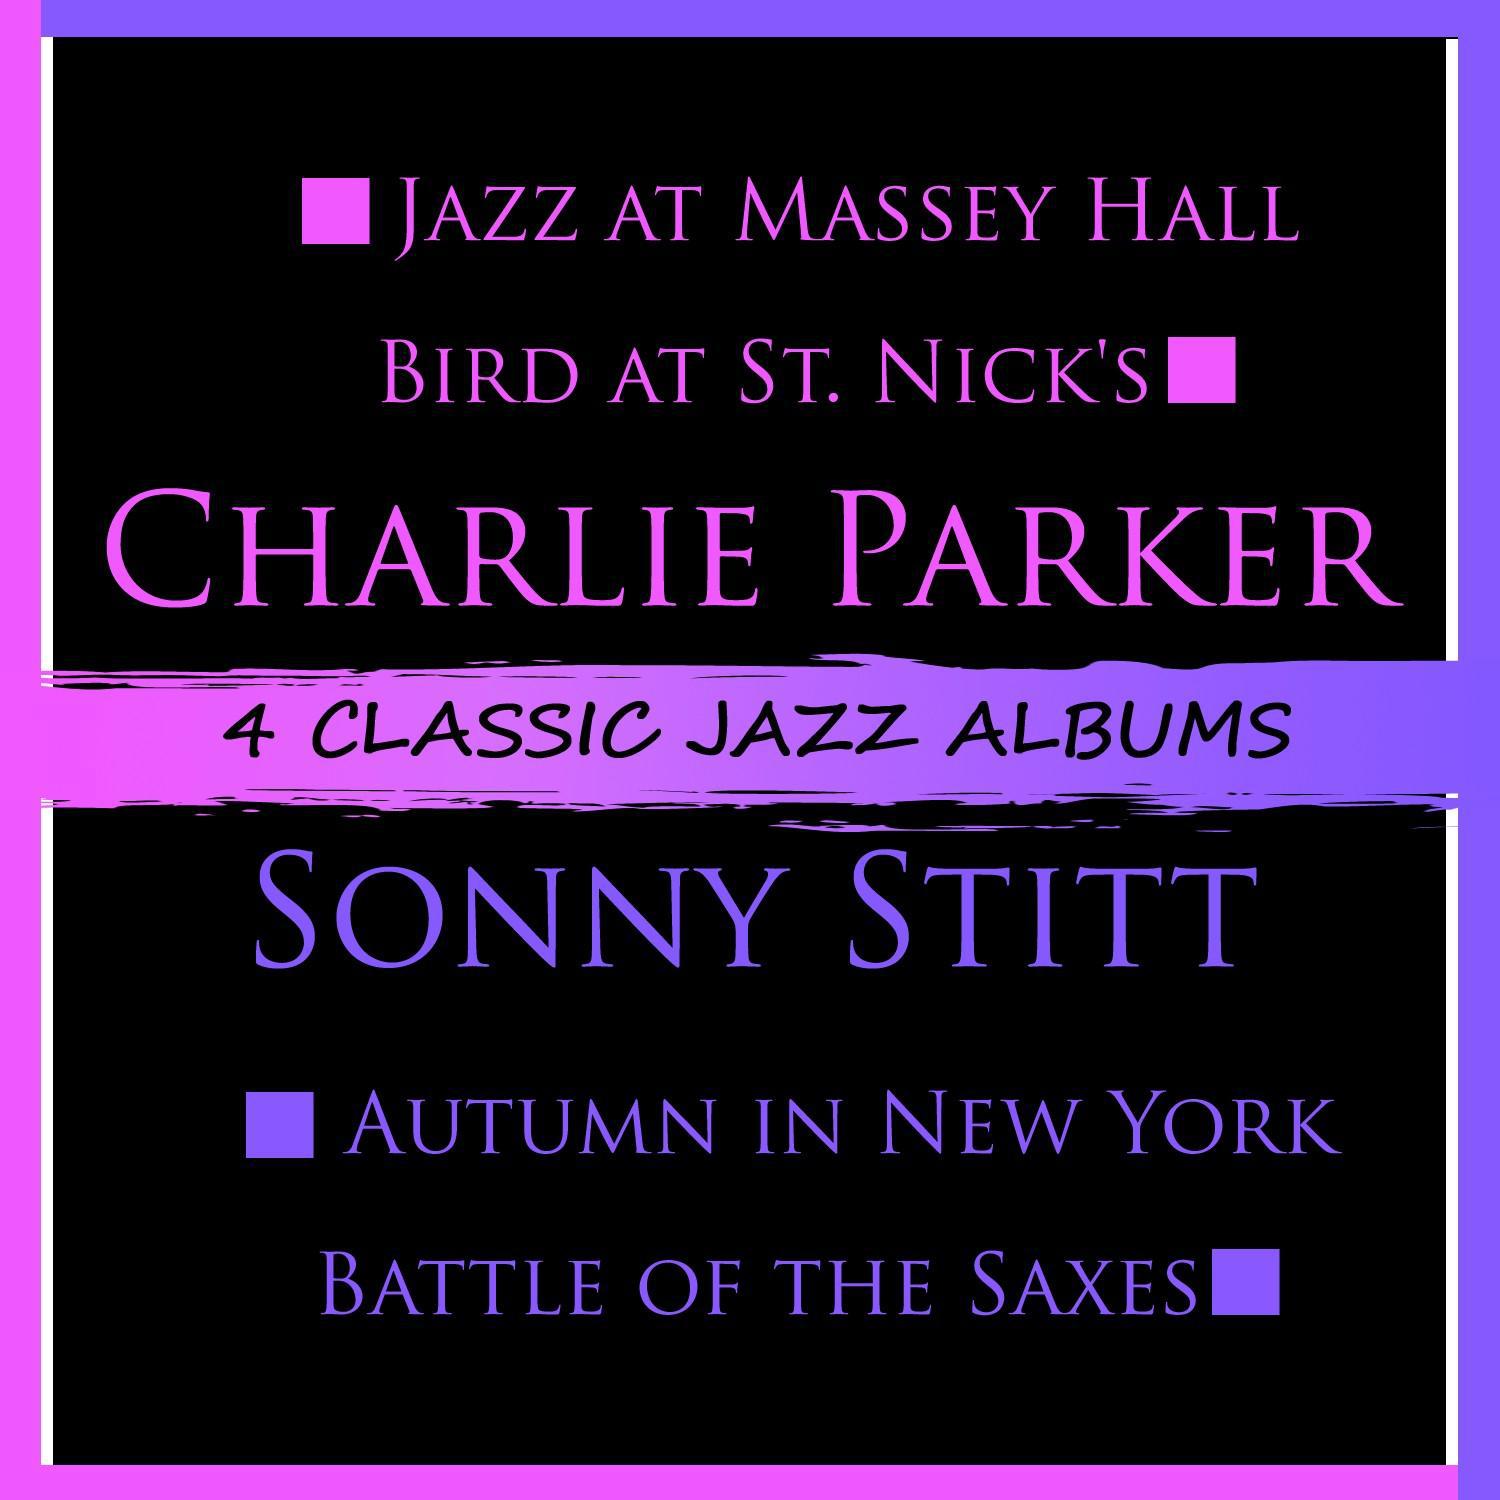 4 Classic Jazz Albums: Jazz at Massey Hall / Bird at St. Nick's / Autumn in New York / Battle of the Saxes